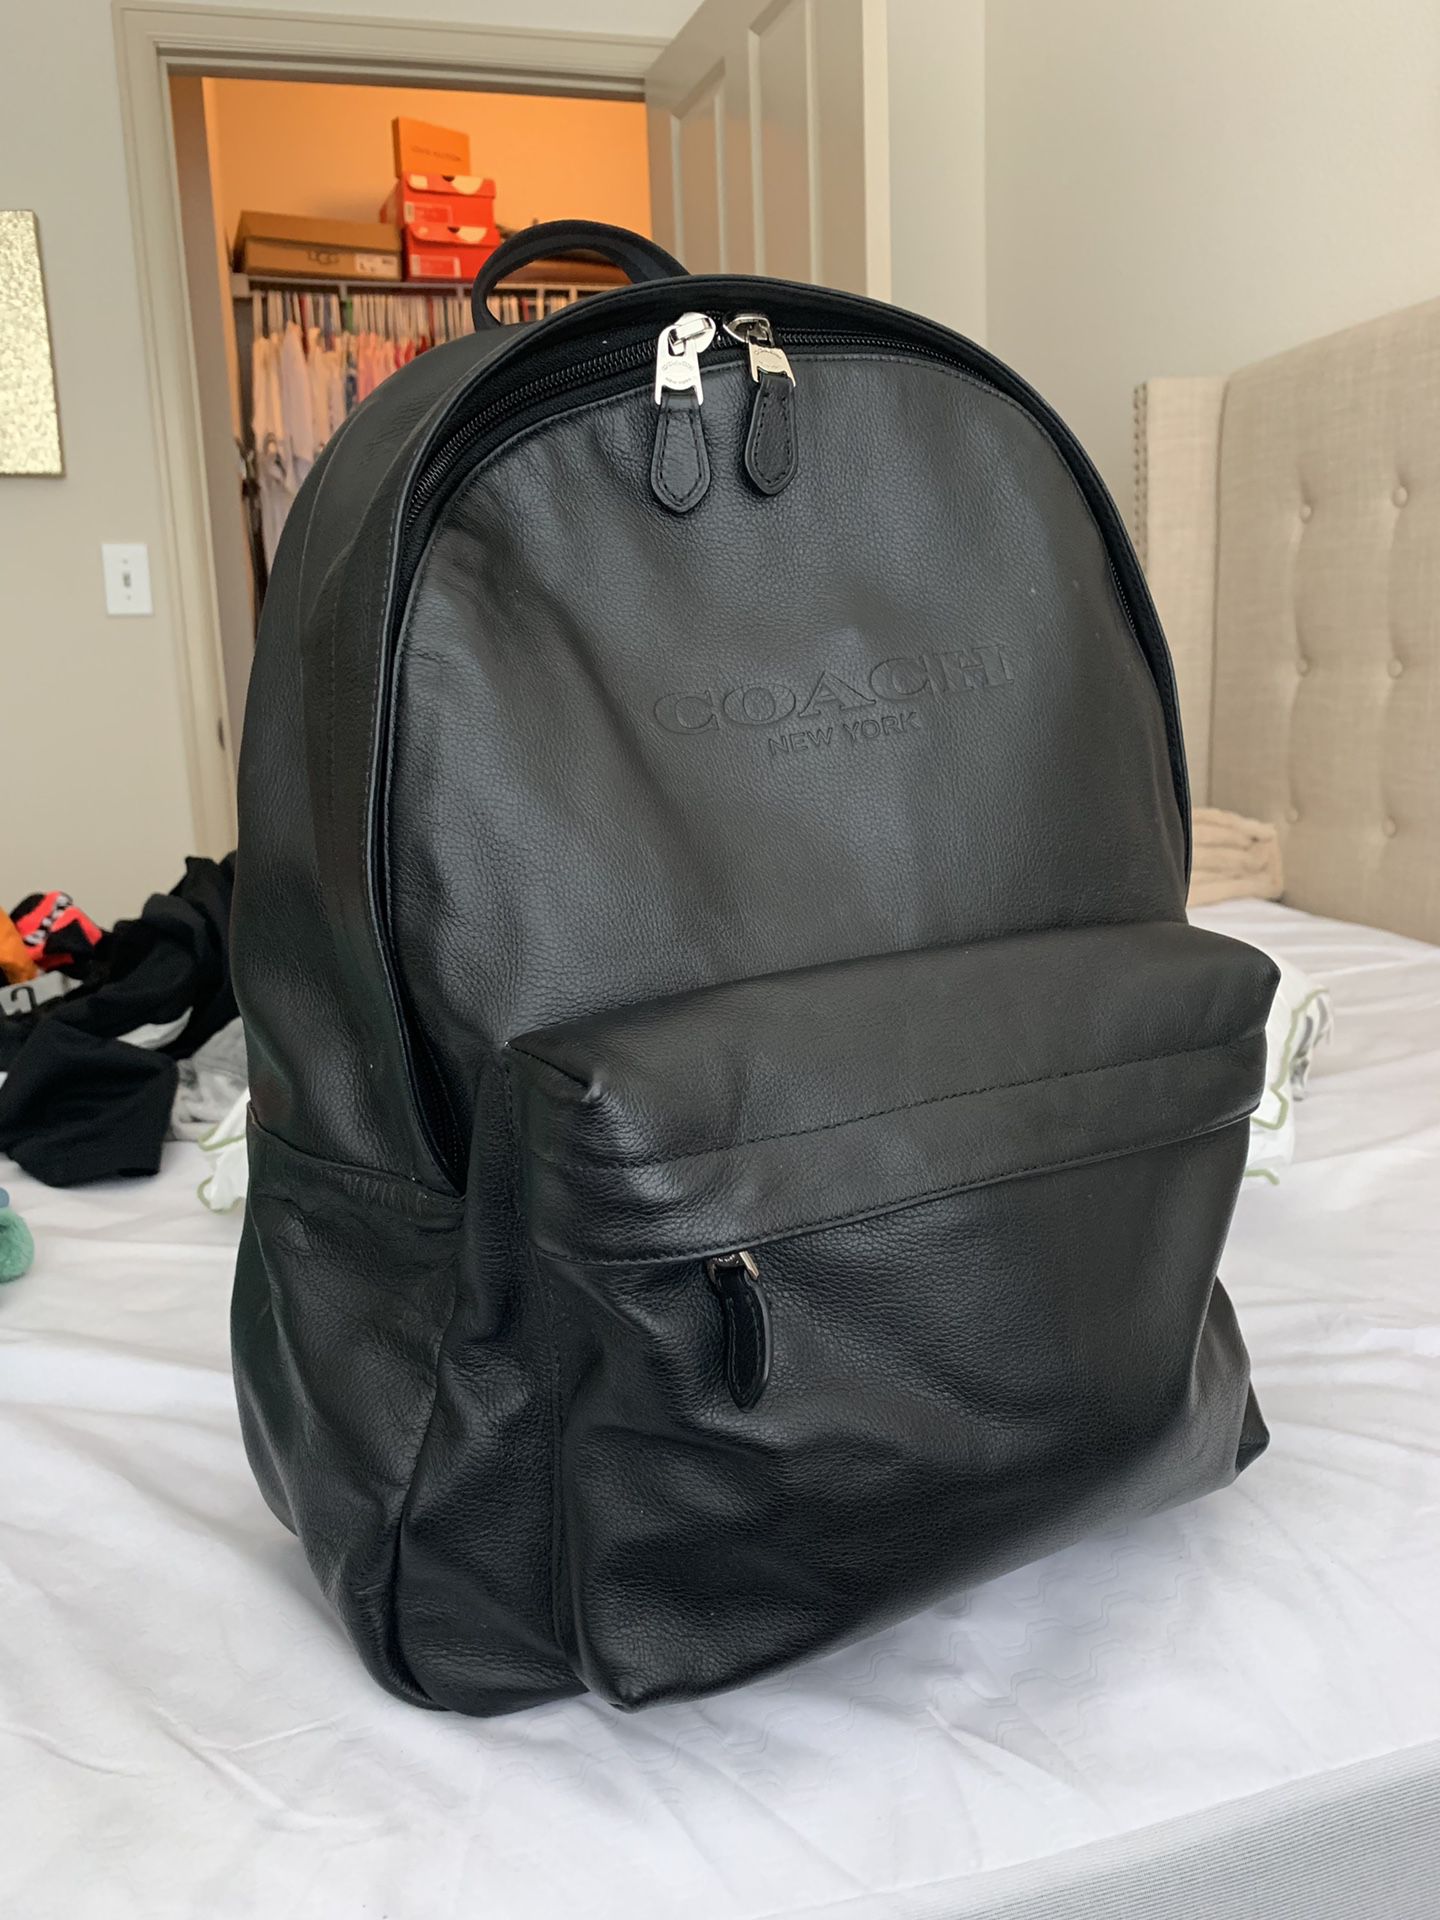 COACH Bag pack for sell